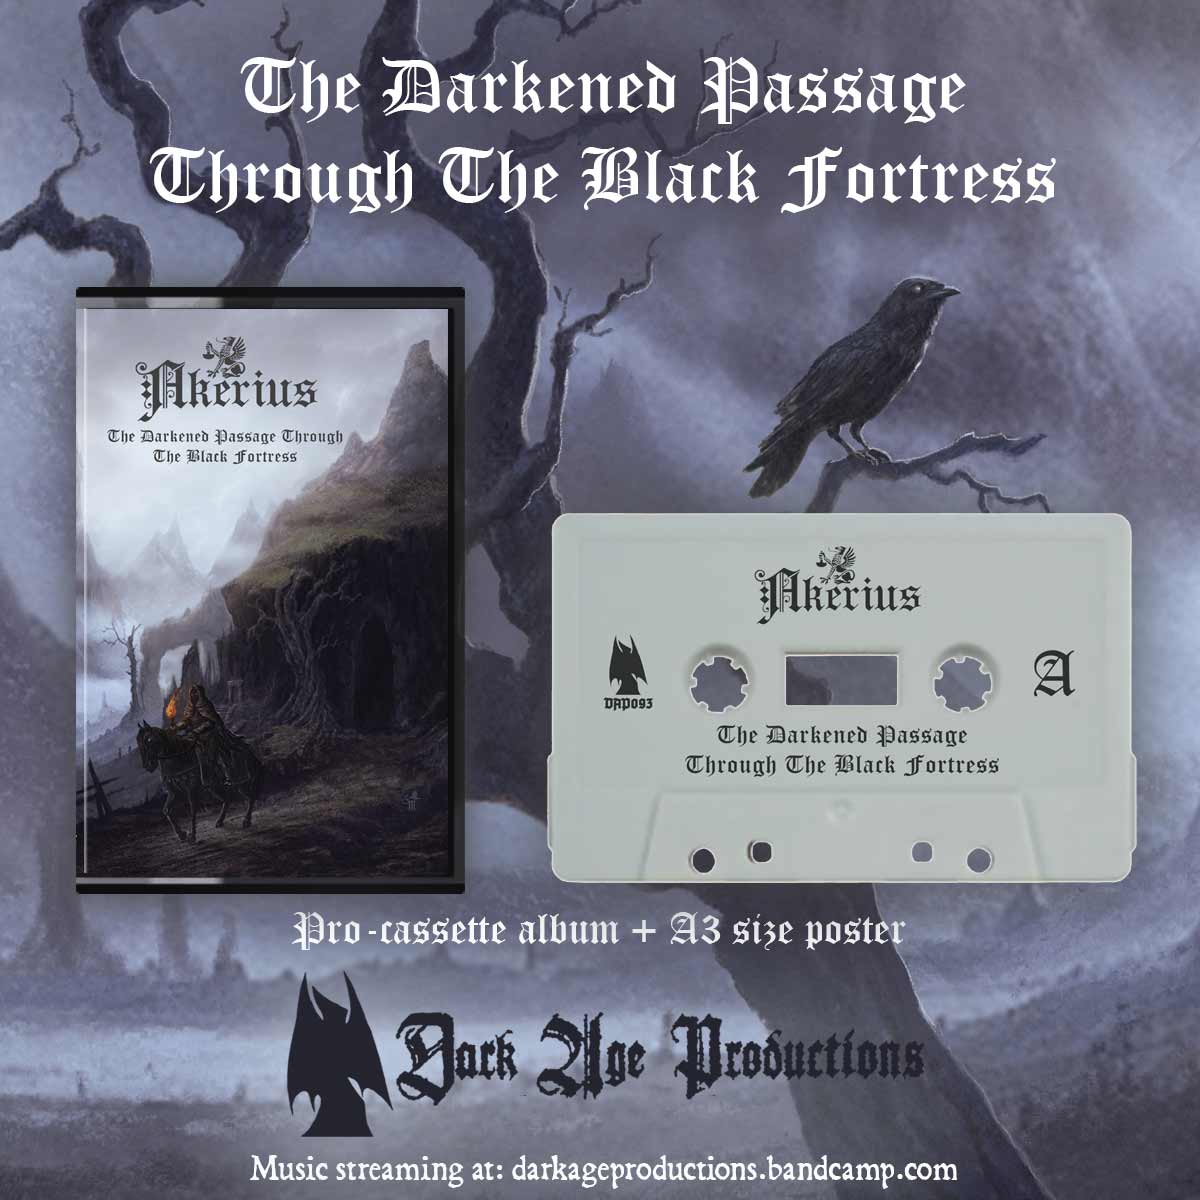 Akerius - The Darkened Passage Through The Black Fortress cassette dungeon synth dark age prductions